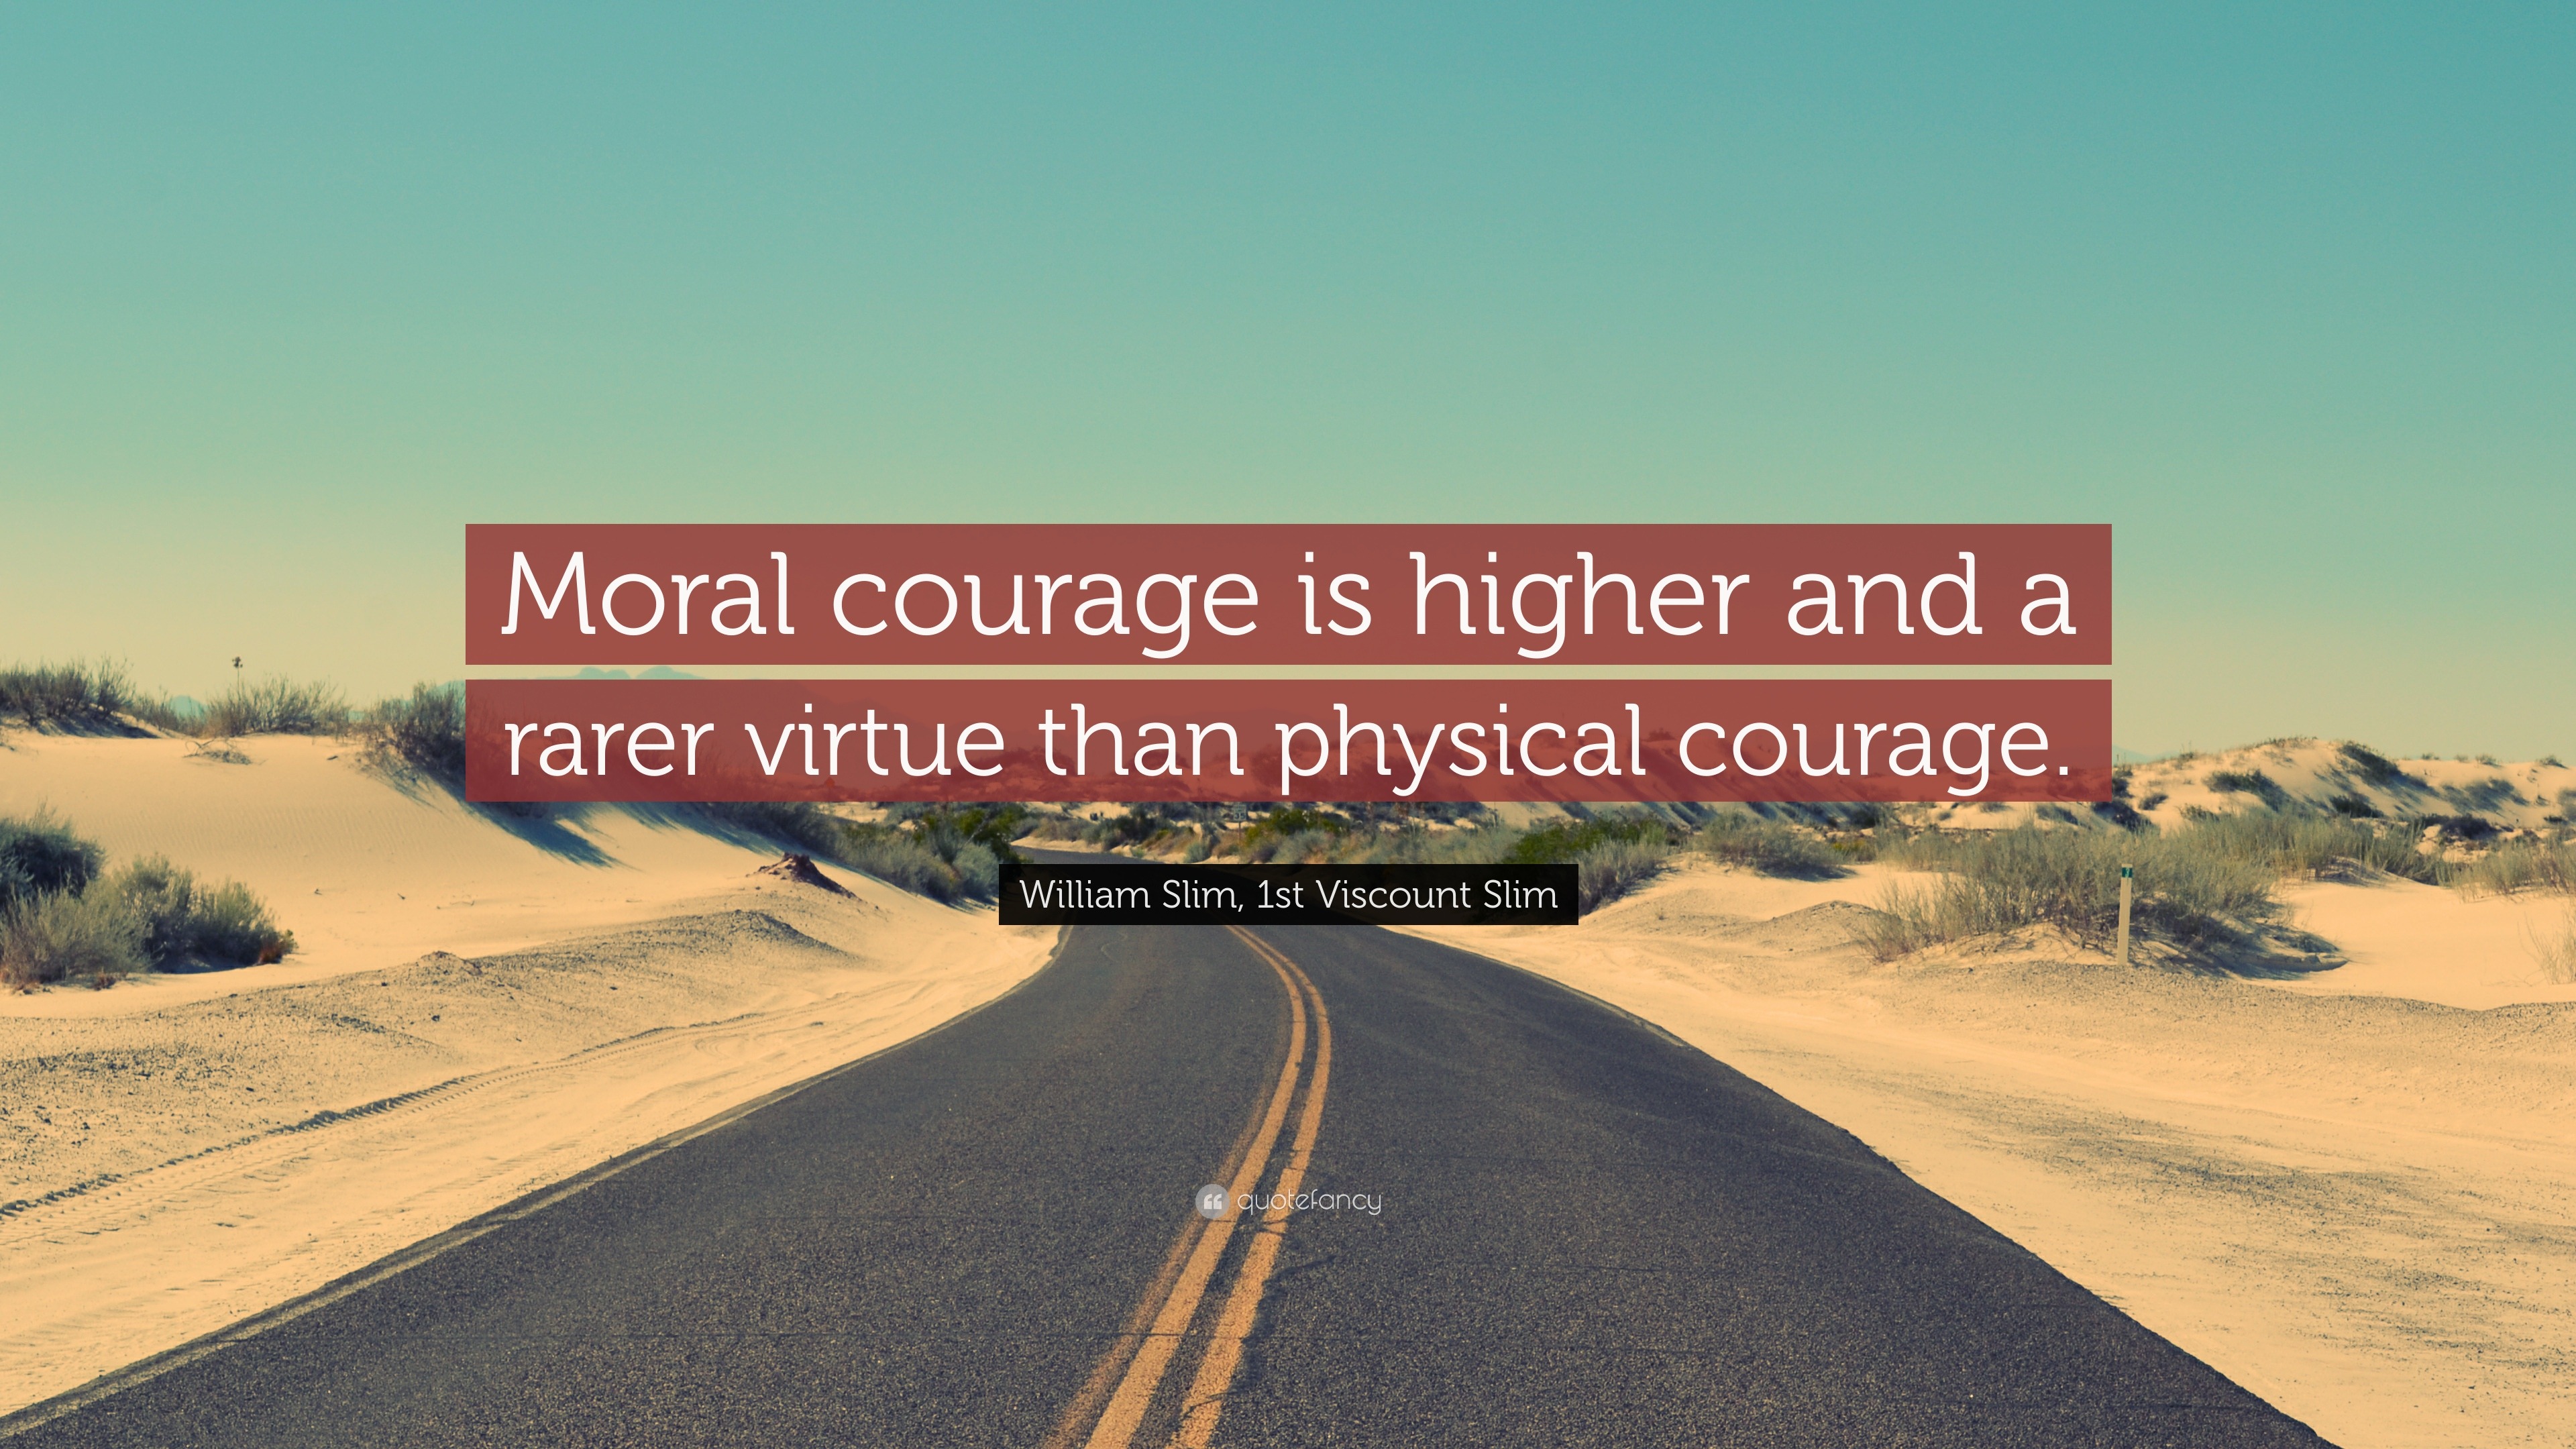 William Slim - Moral courage is higher and a rarer virtue